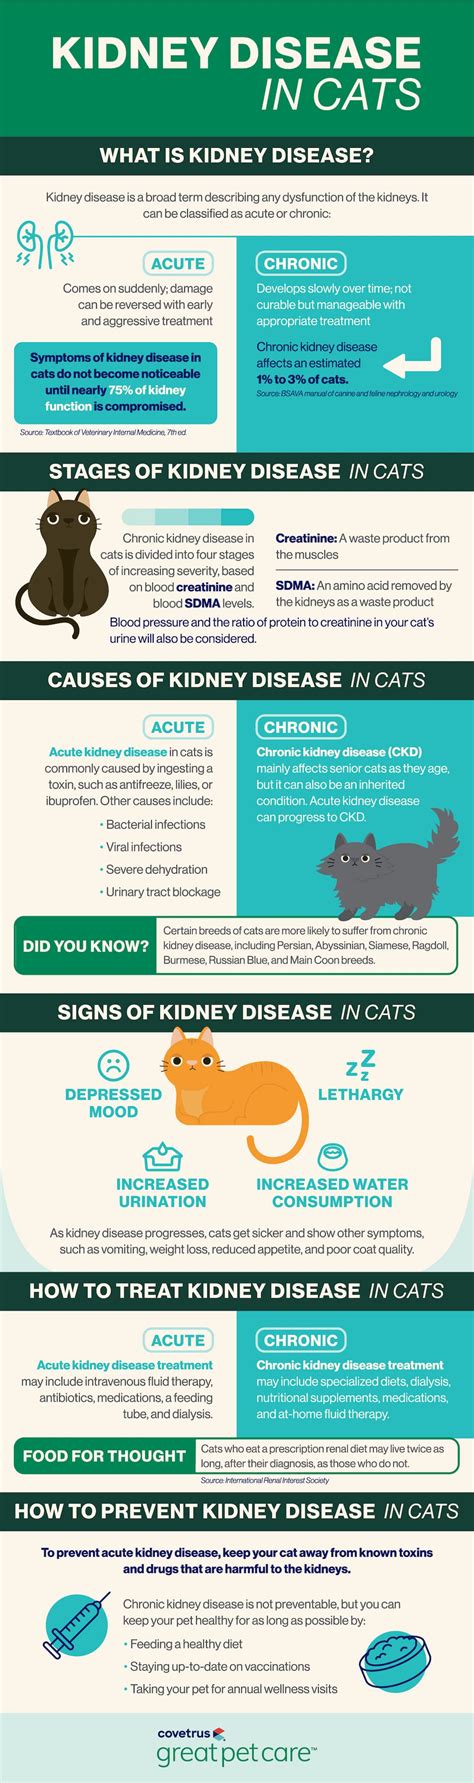 Kidney Health Products For Cats